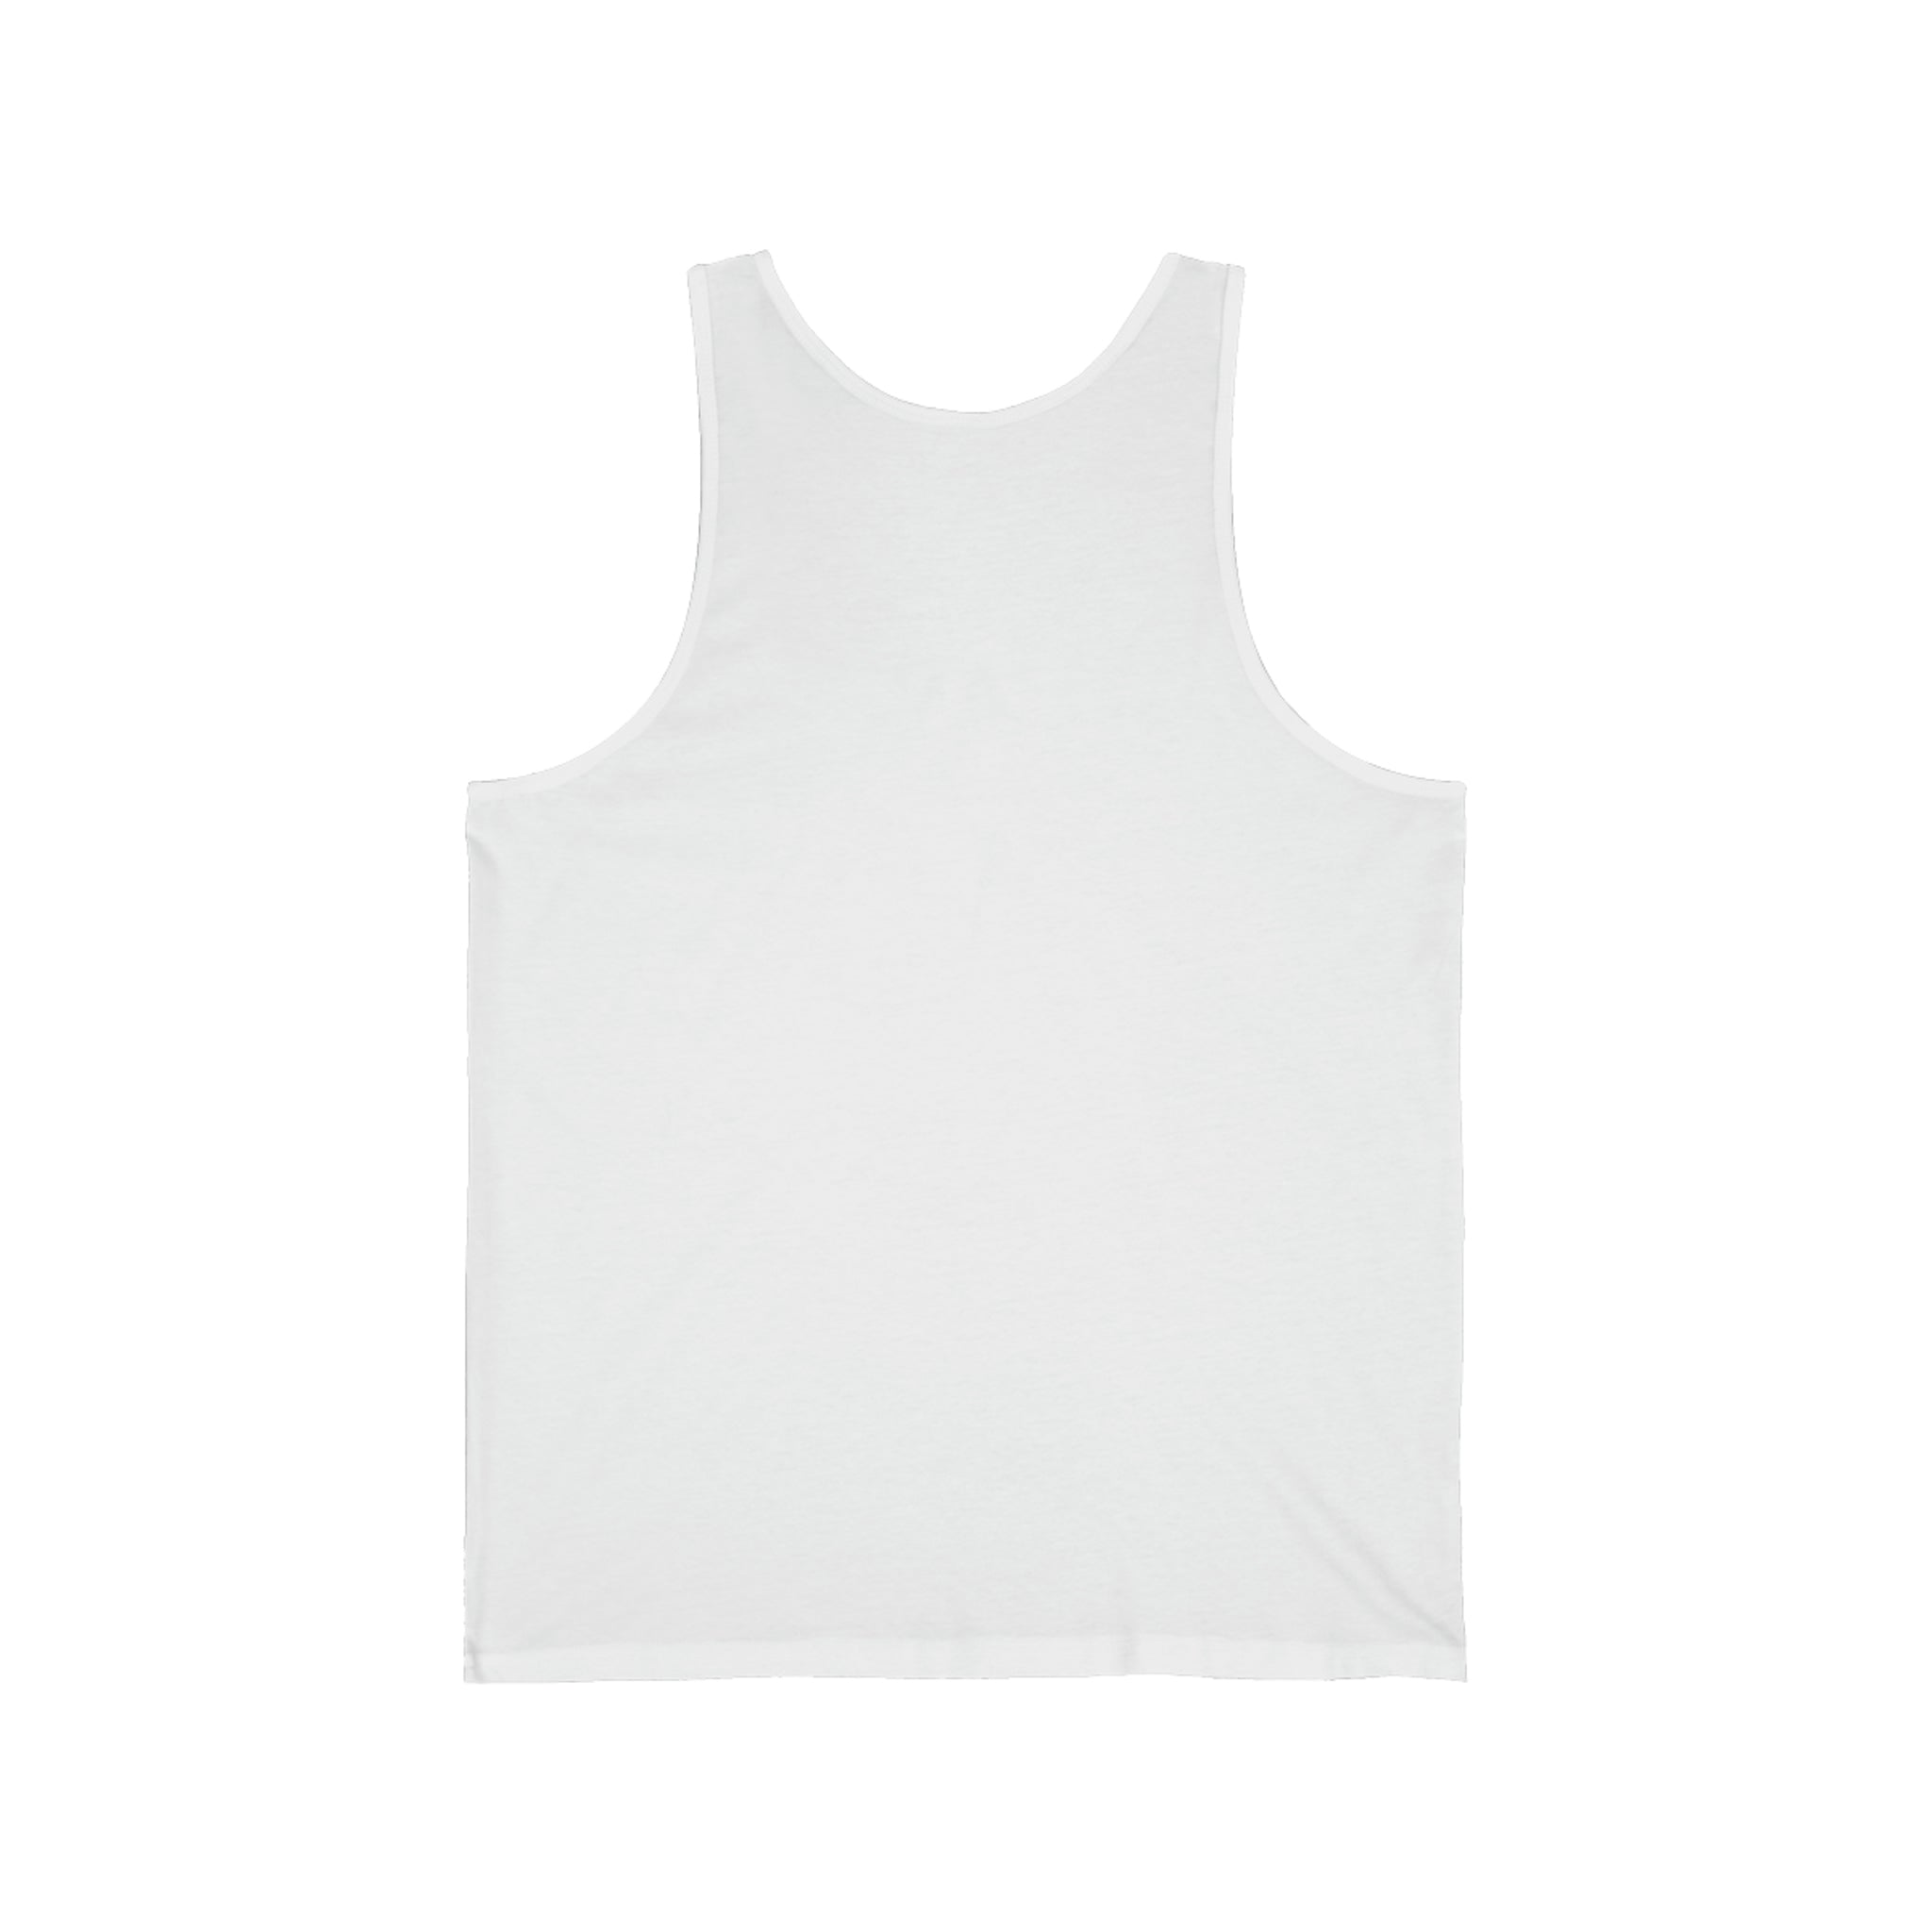 Limited Edition Unisex Jersey Tank